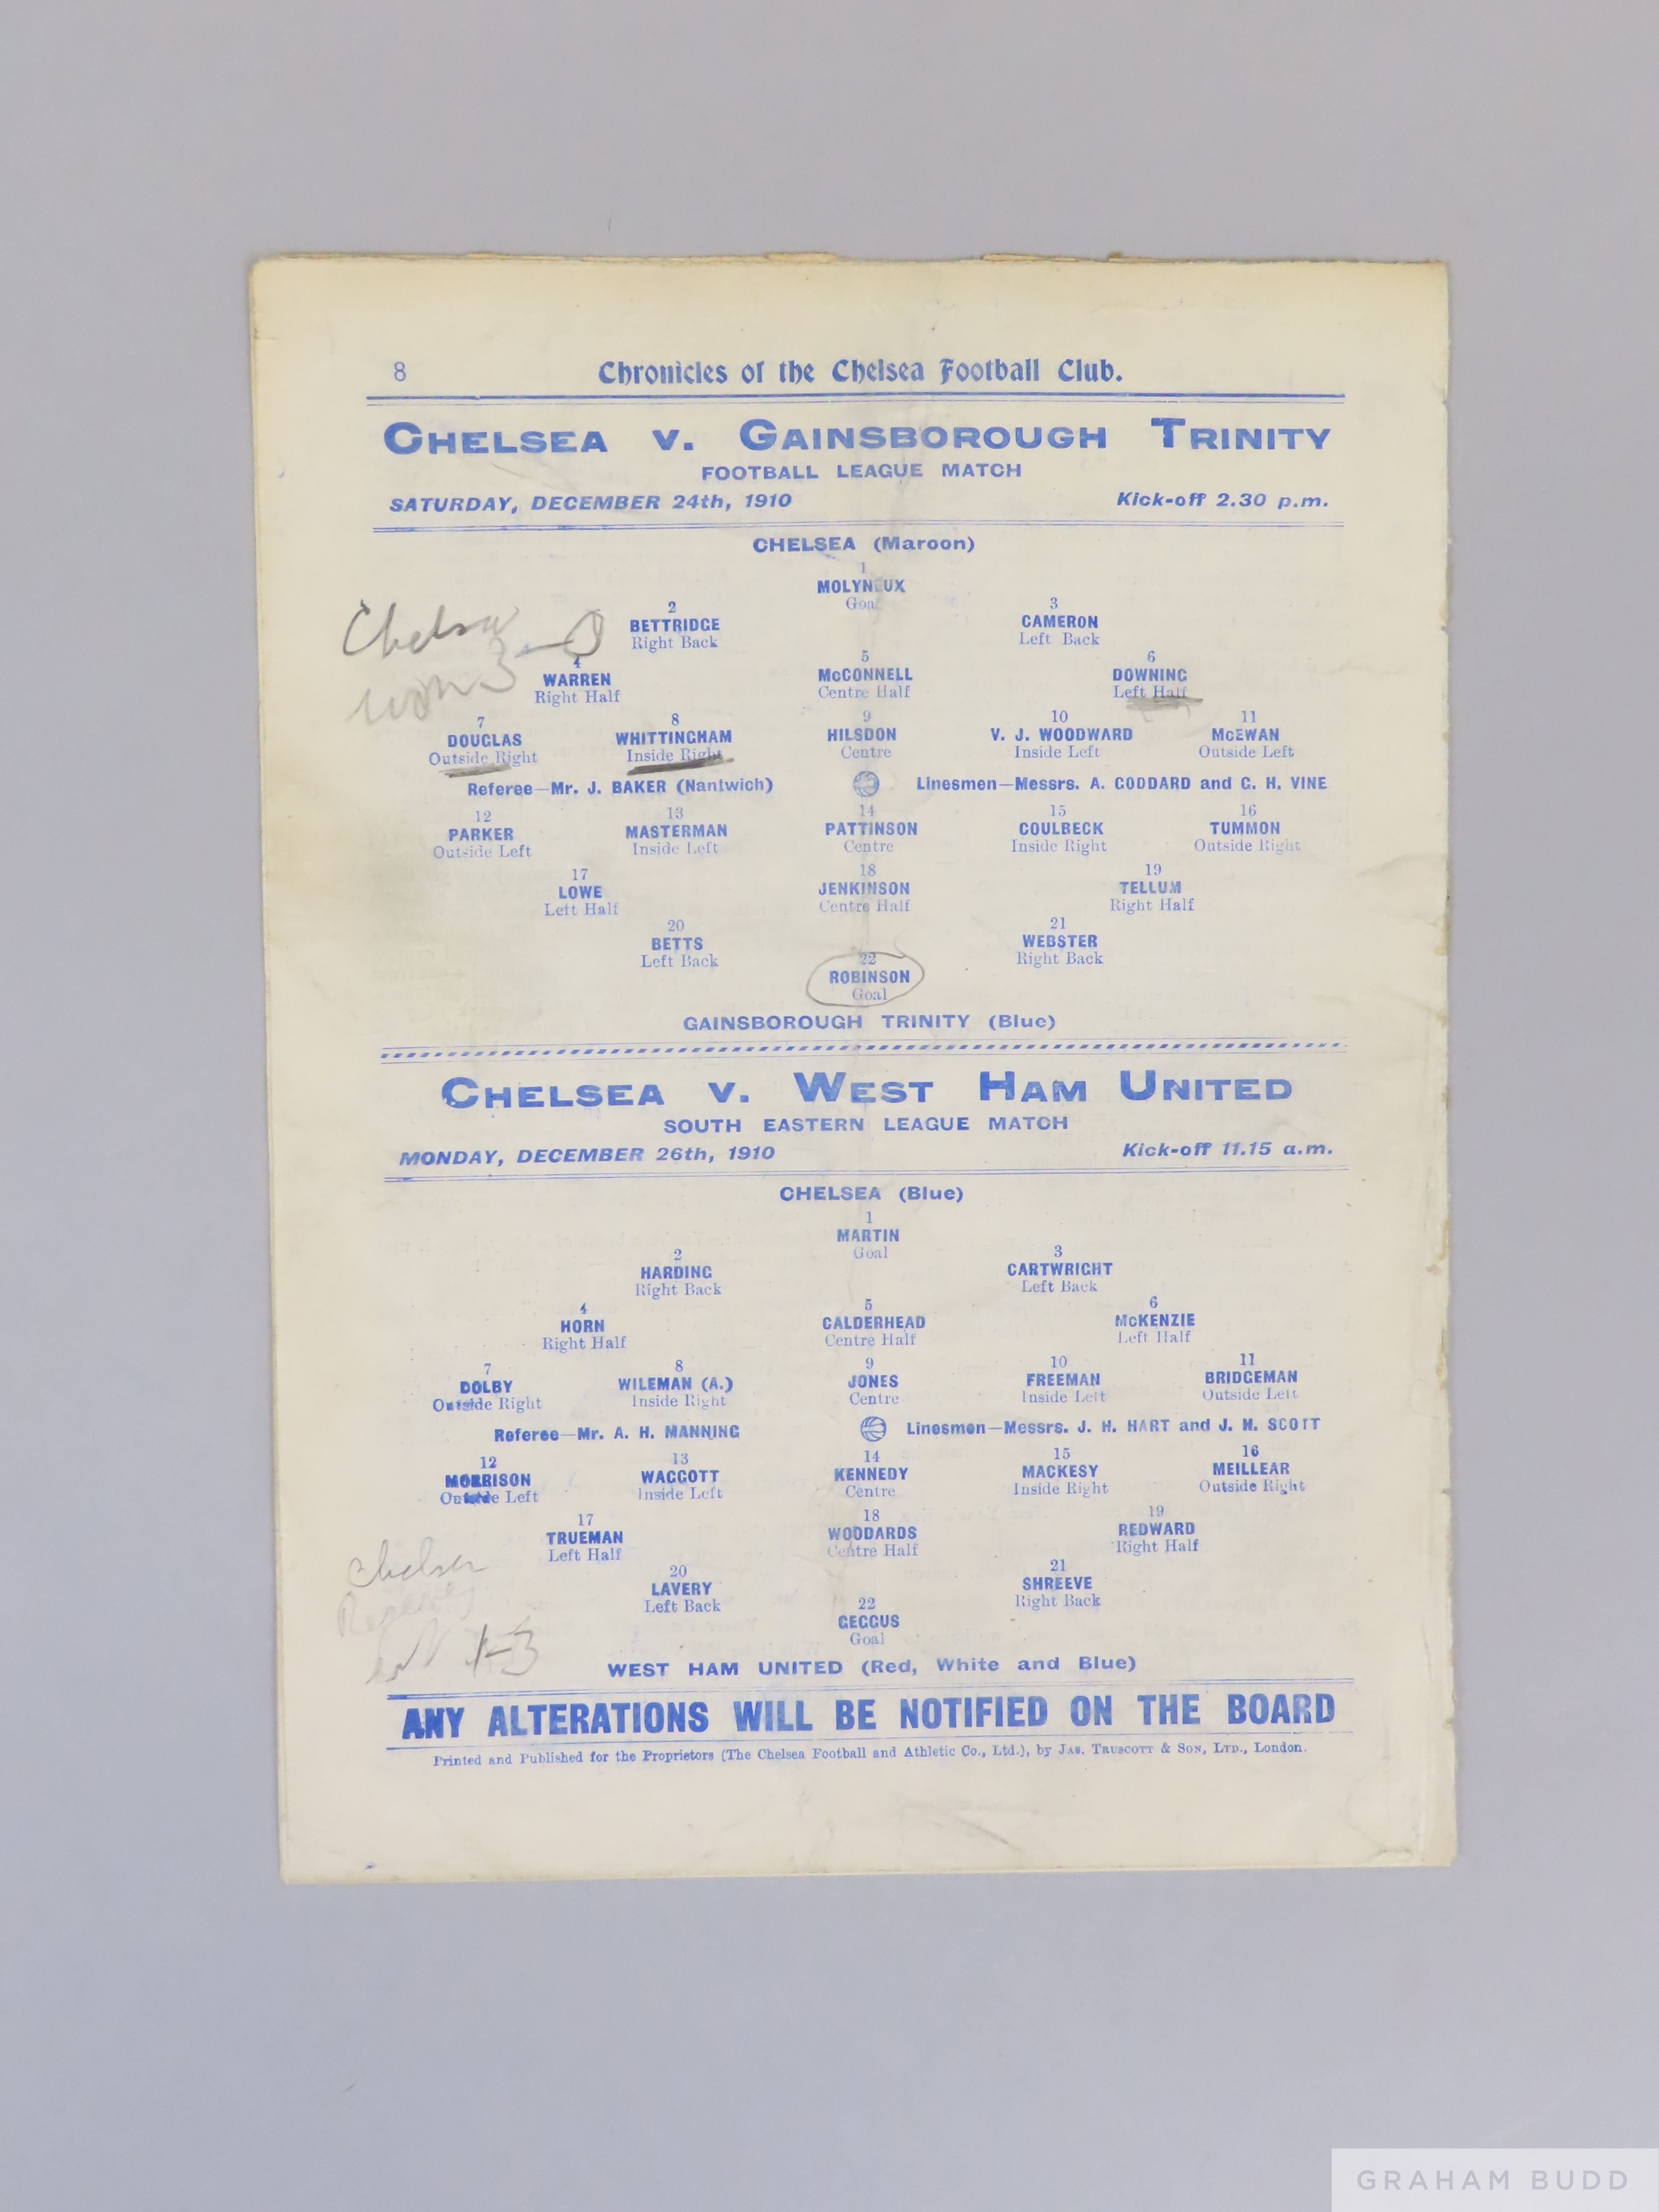 Chelsea v. Gainsborough Trinity and West Ham United match programme, 24th and 26th December 1910 - Image 2 of 2